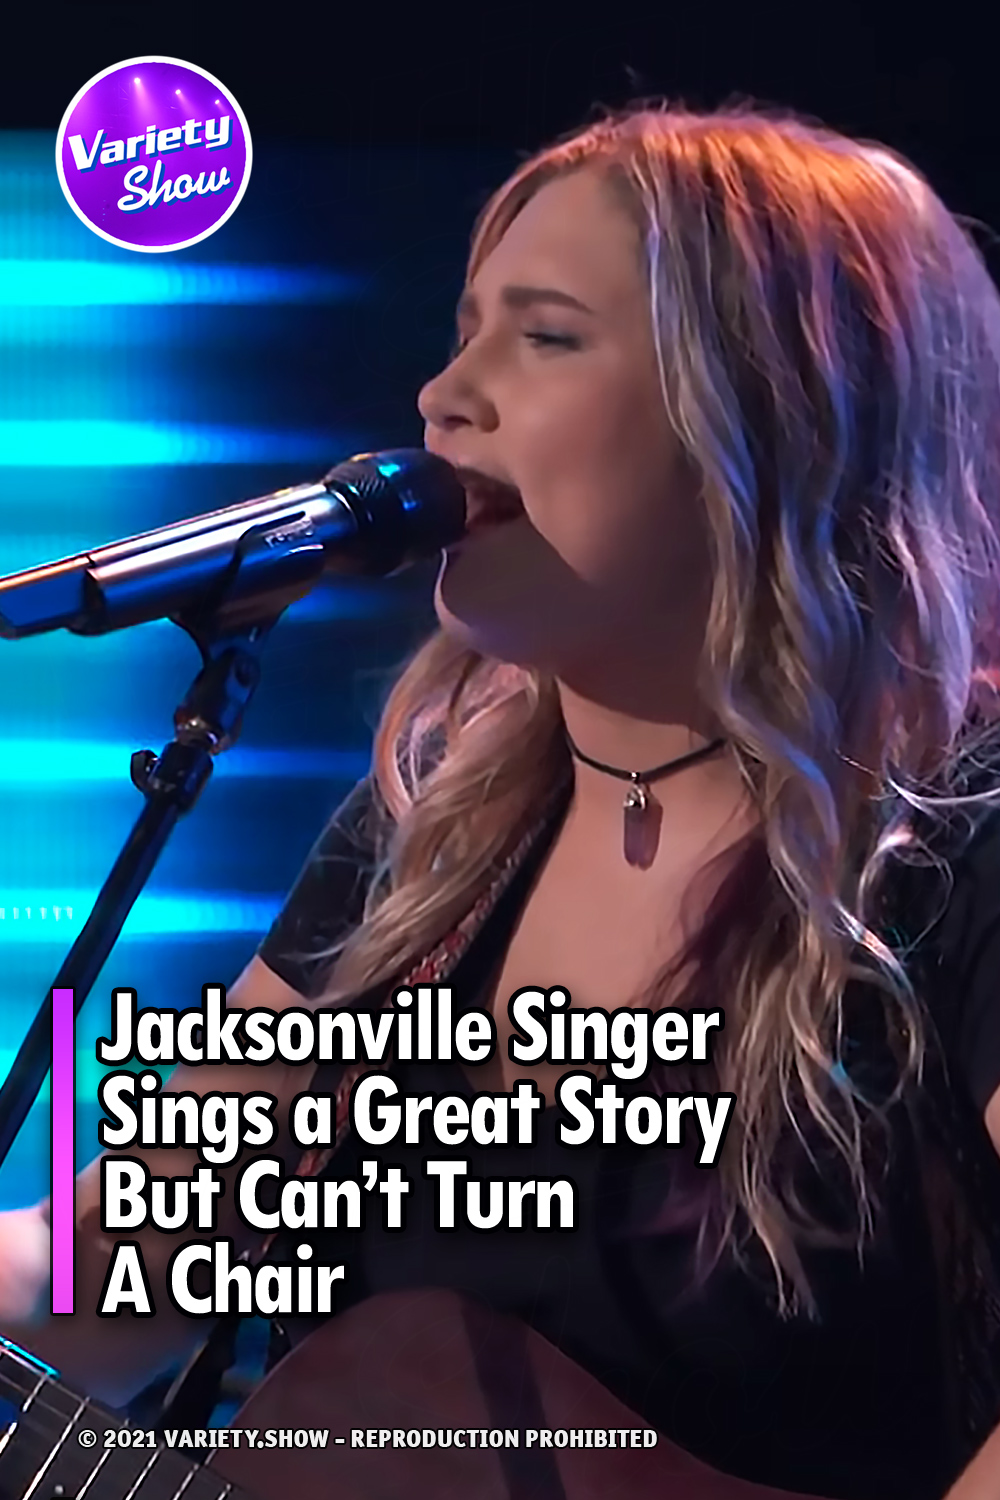 Jacksonville Singer Sings a Great Story But Can’t Turn A Chair